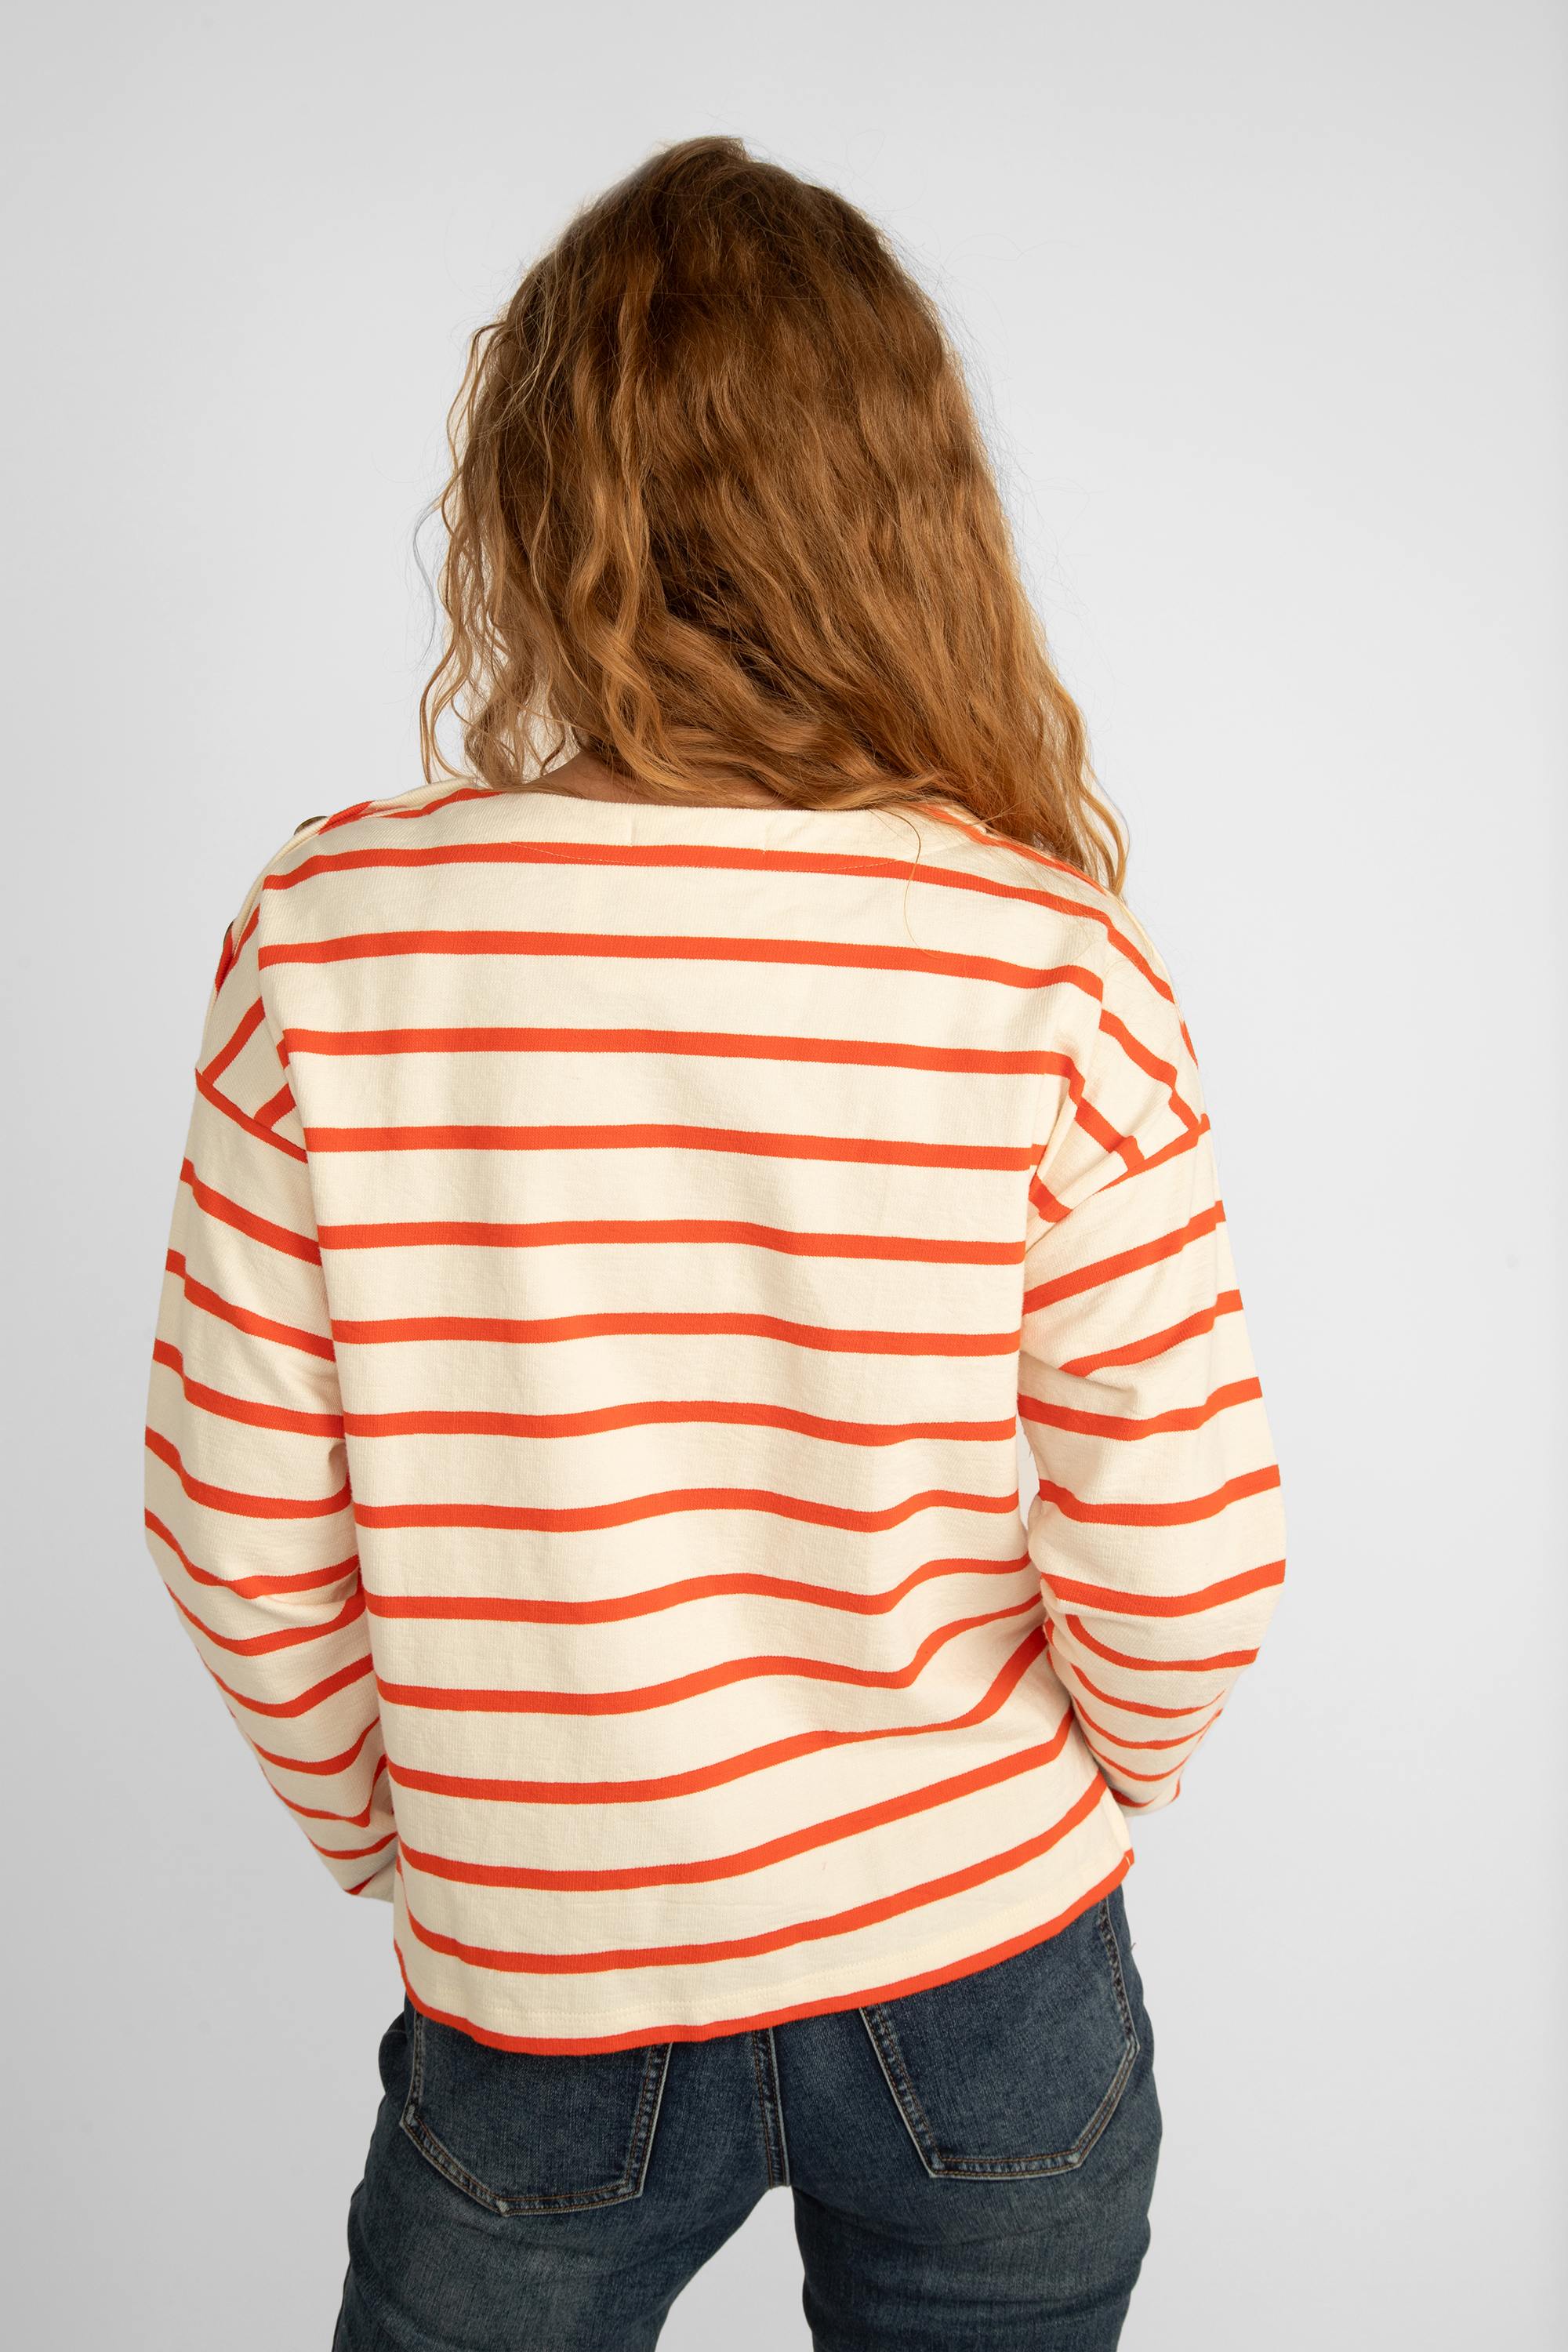 Back view of  Garcia (N40260) Women's Recycled Cotton Boatneck Long Sleeve Top in cream with orange stripes